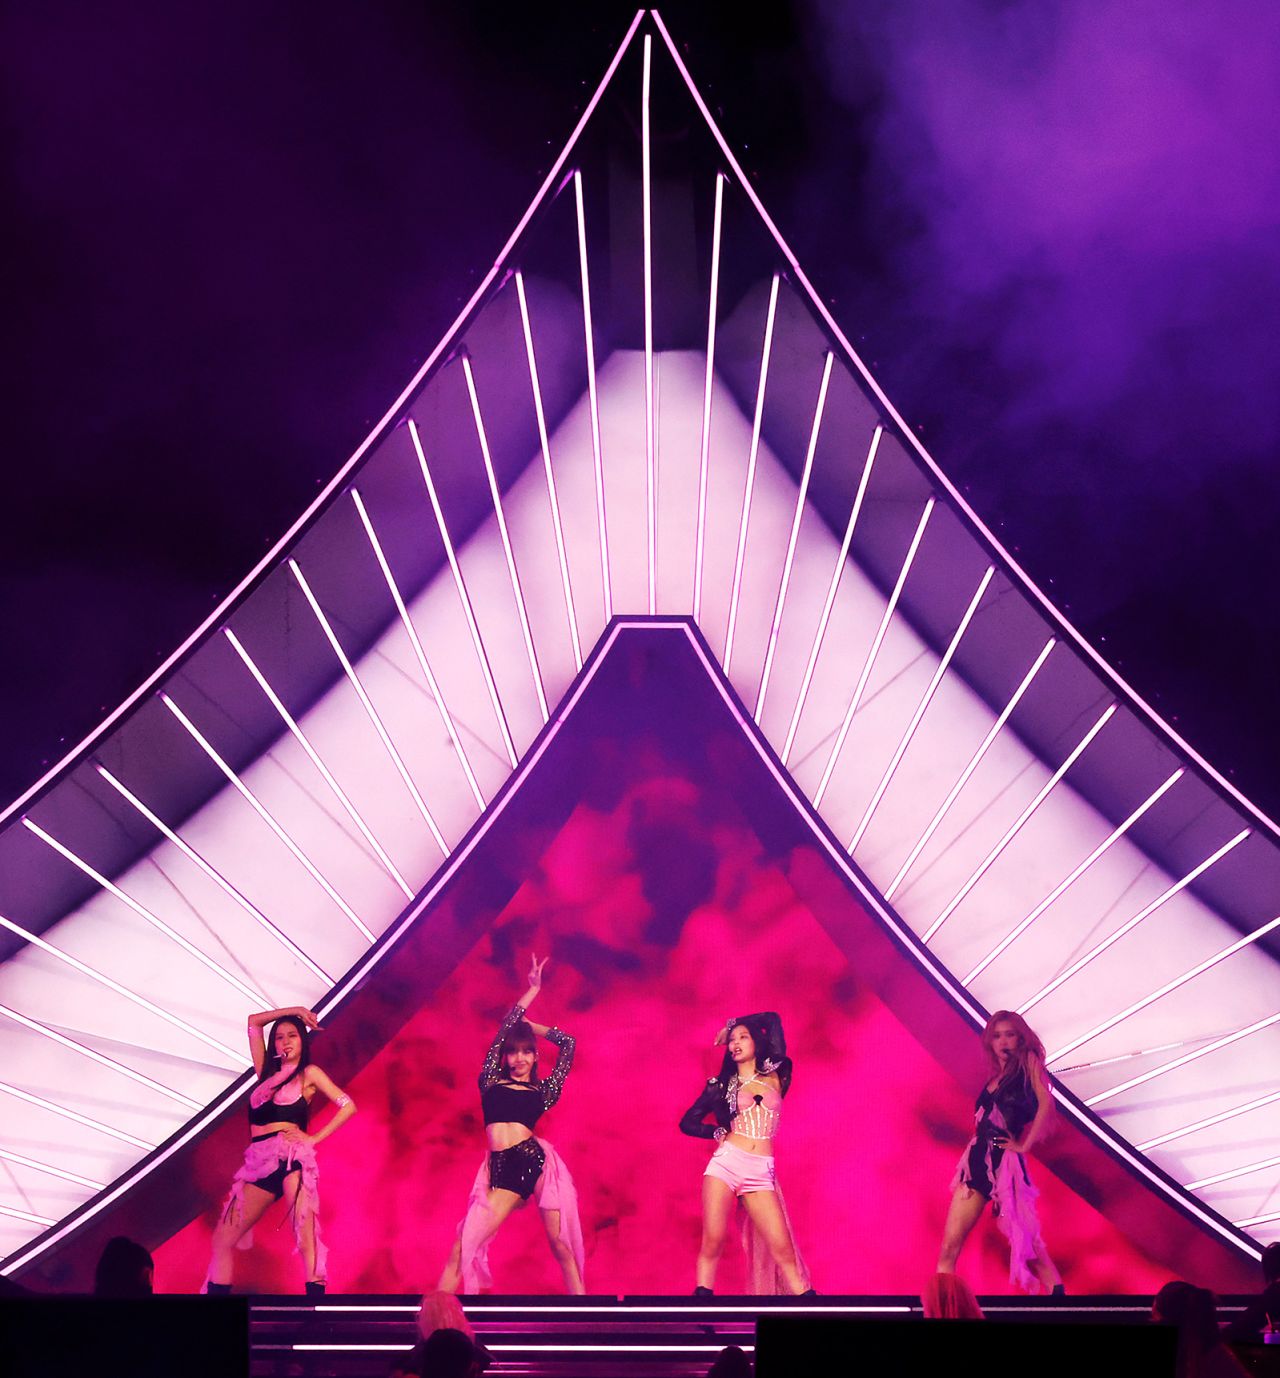 The stage design is another acknowledgment of Korean heritage.